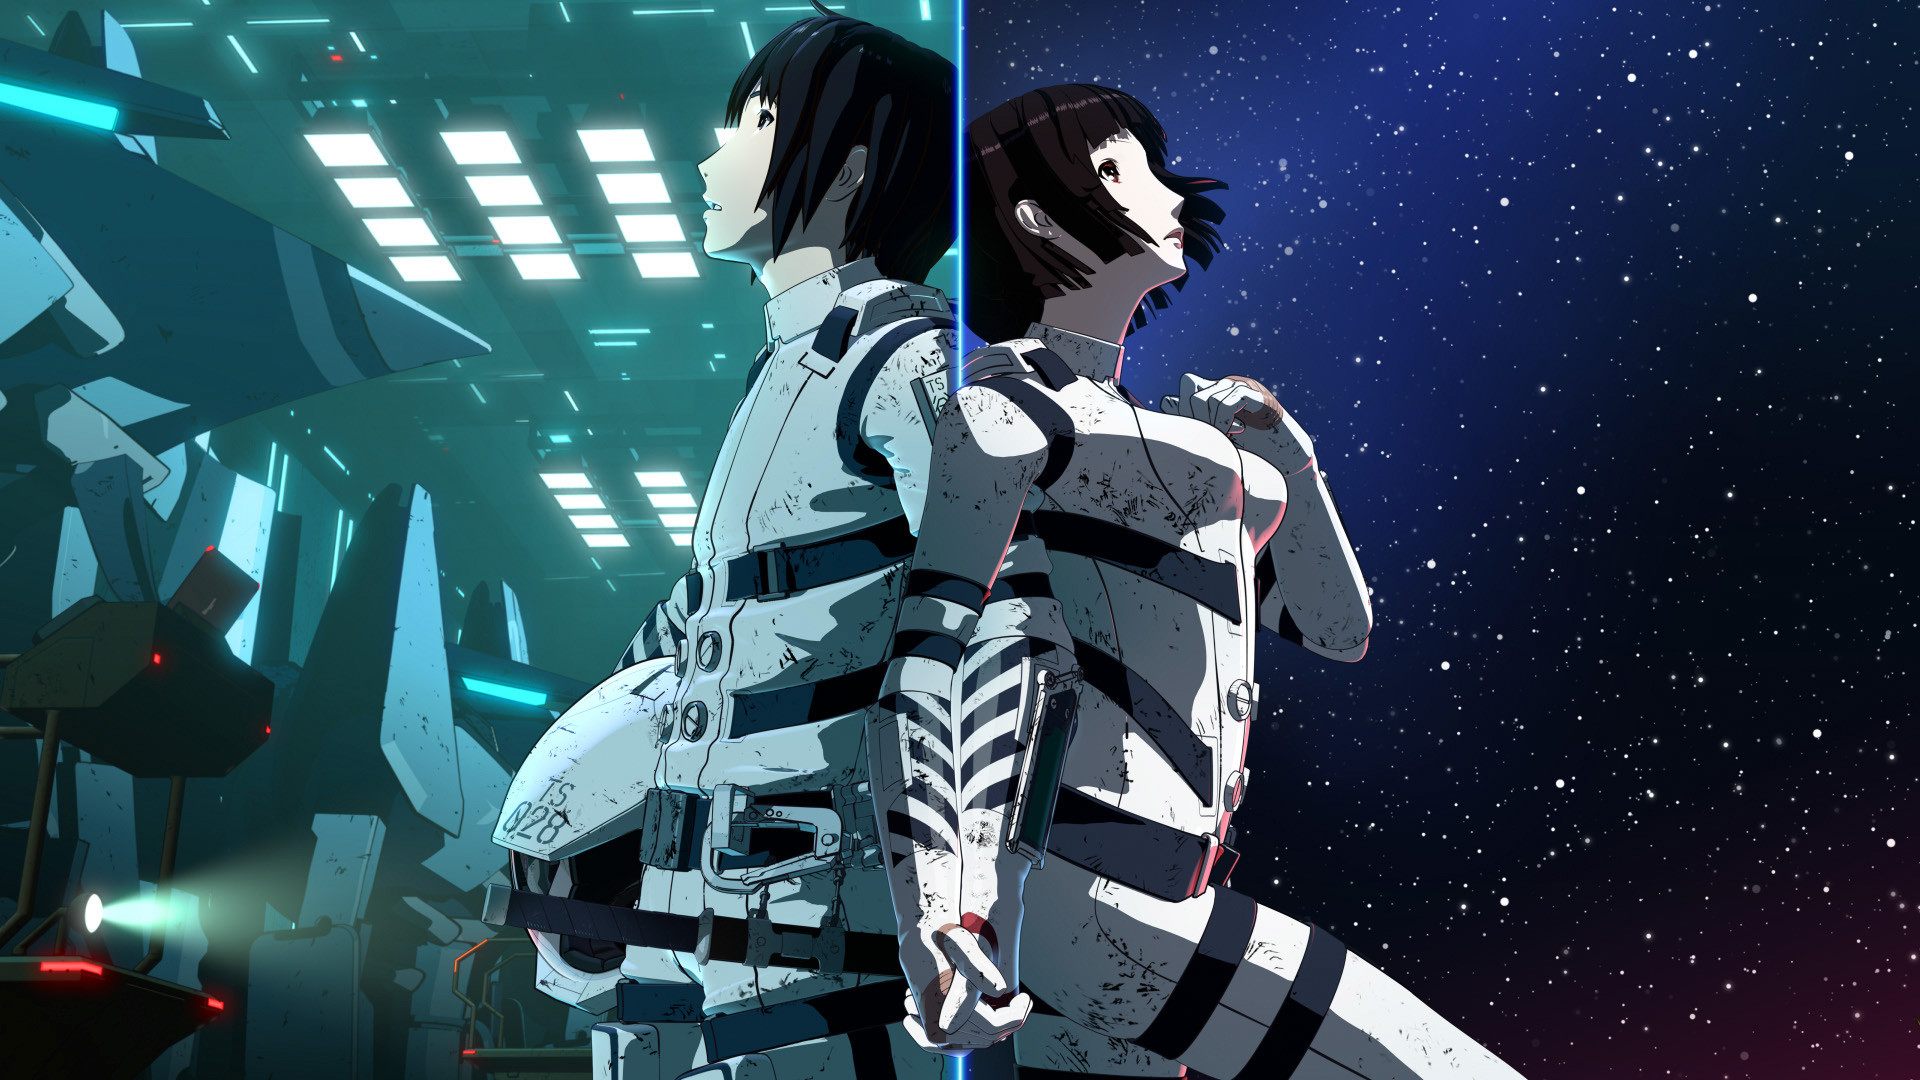 1920x1080 18 Knights Of Sidonia HD Wallpapers | Backgrounds - Wallpaper Abyss